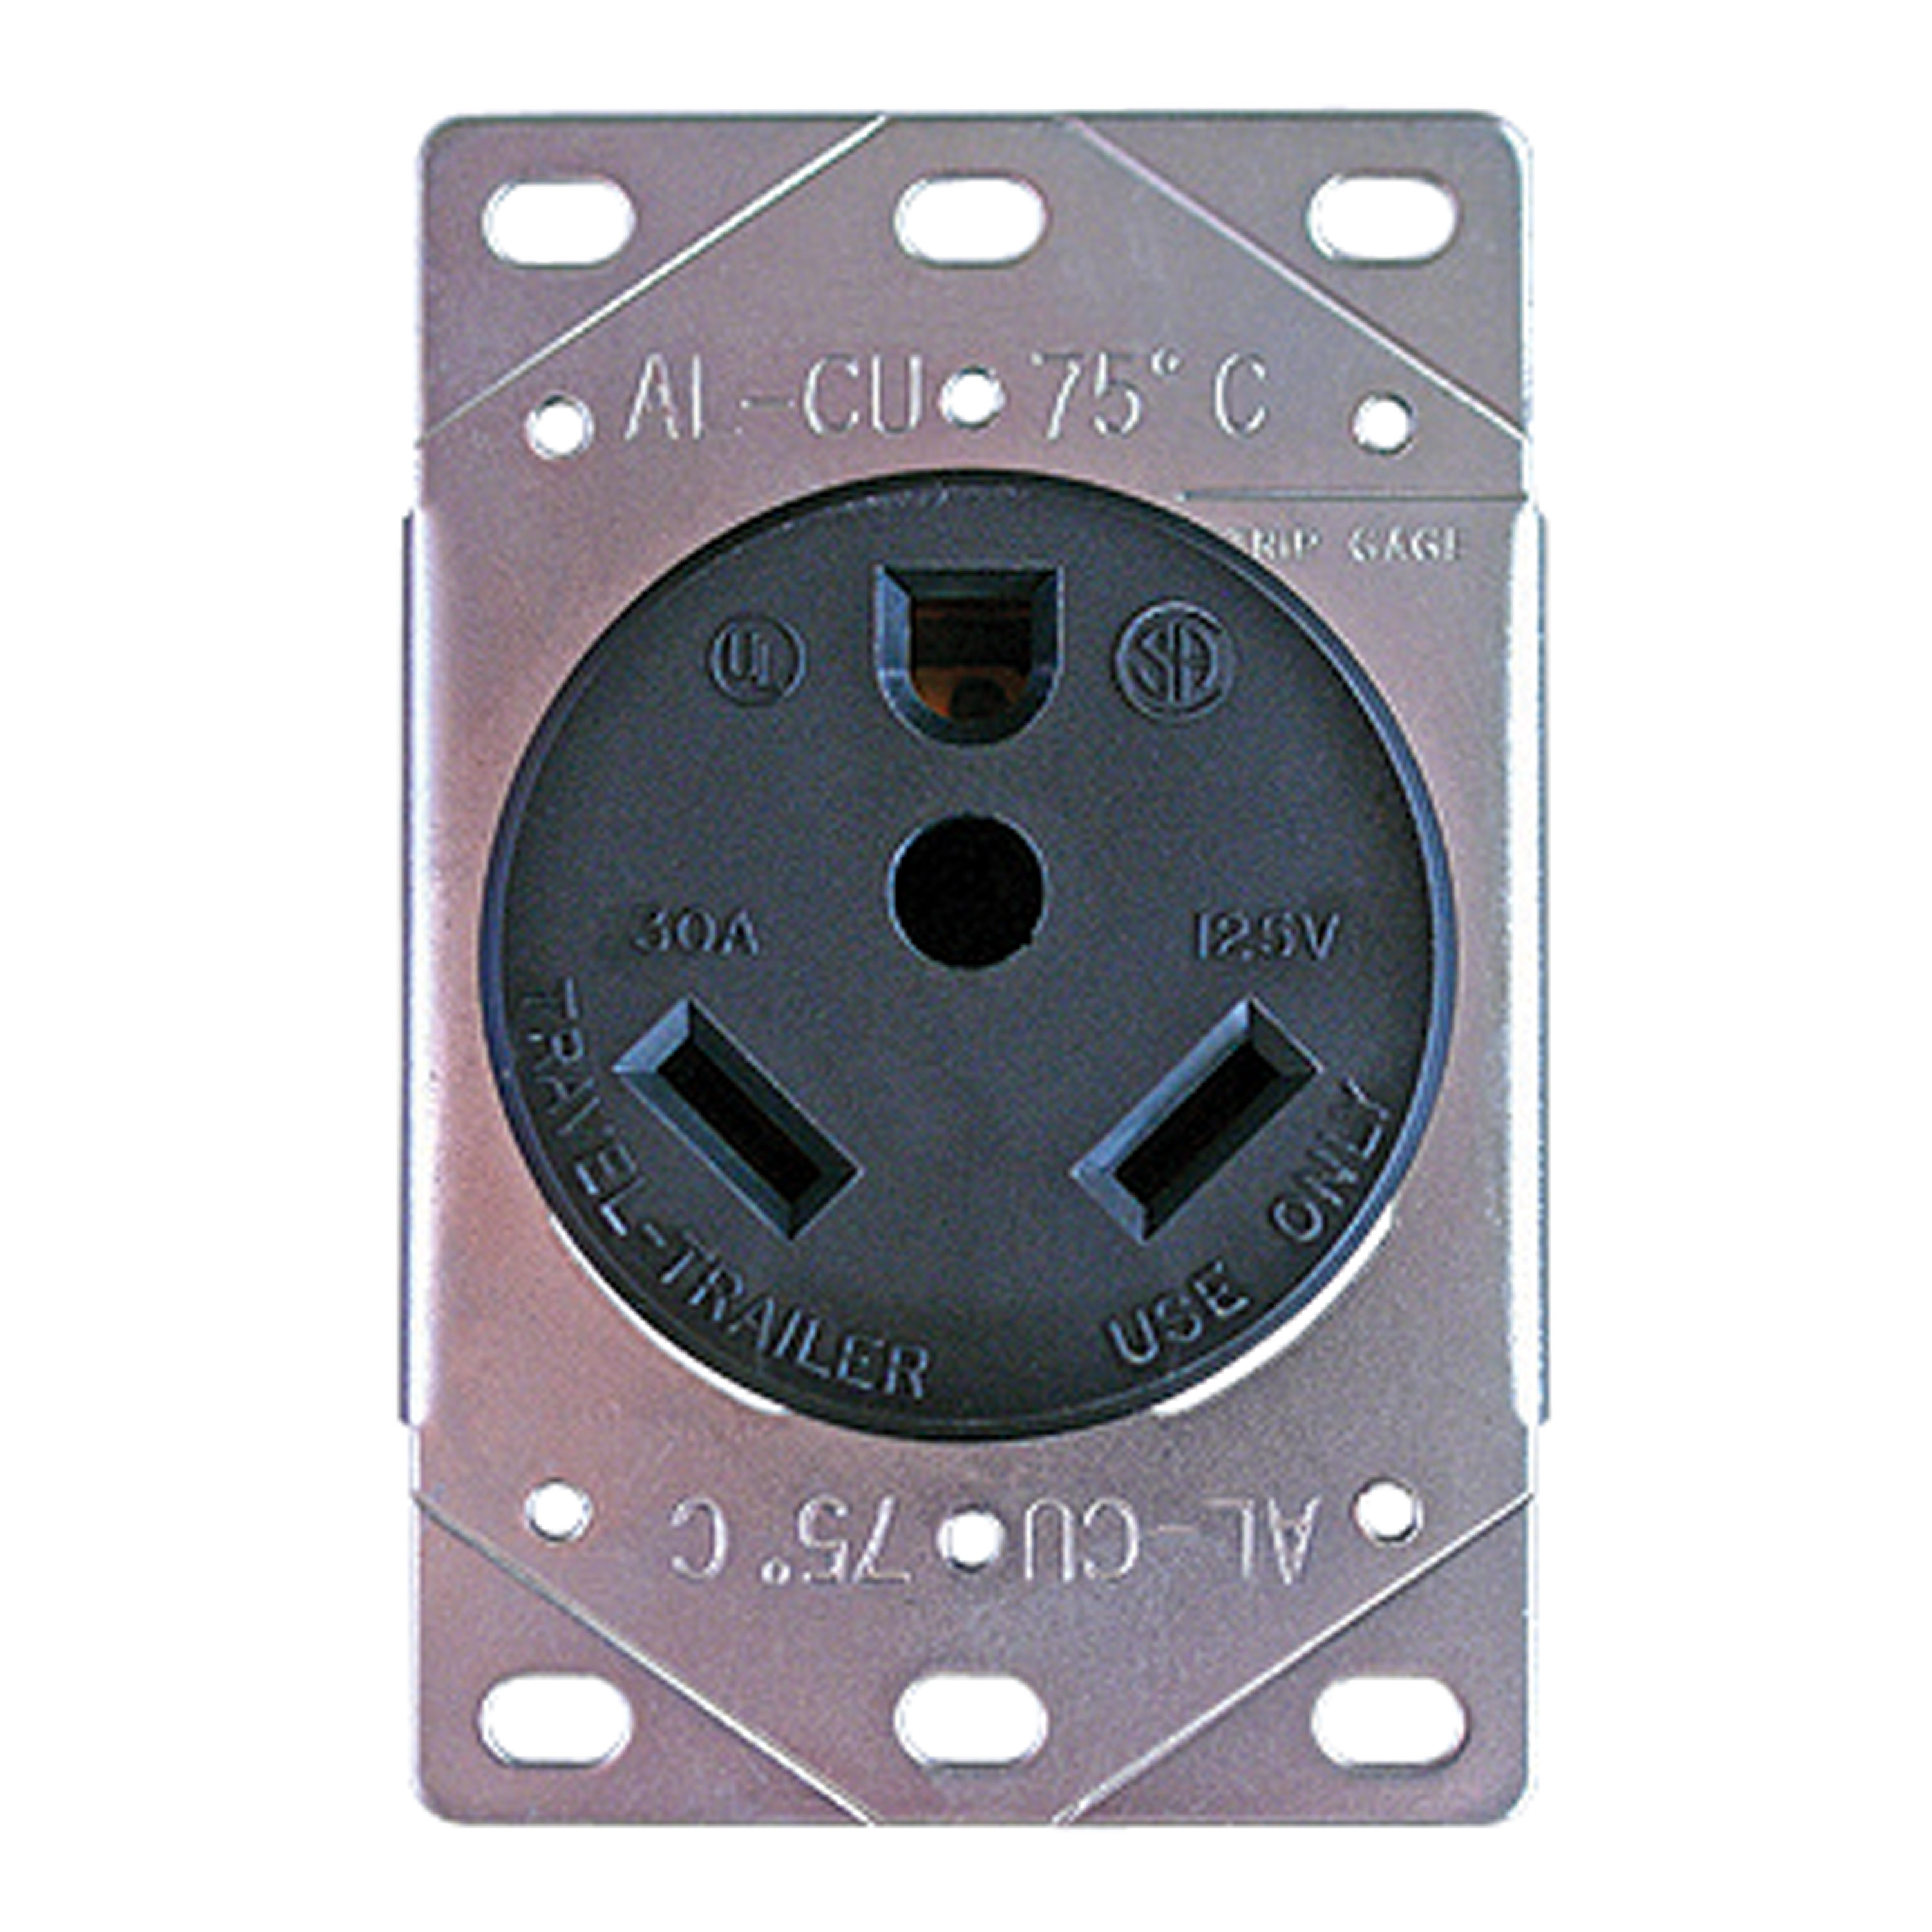 Progressive Industries Dead Front Wall Mount Receptacle - 30 Amp TT How To Add A 30 Amp Rv Outlet